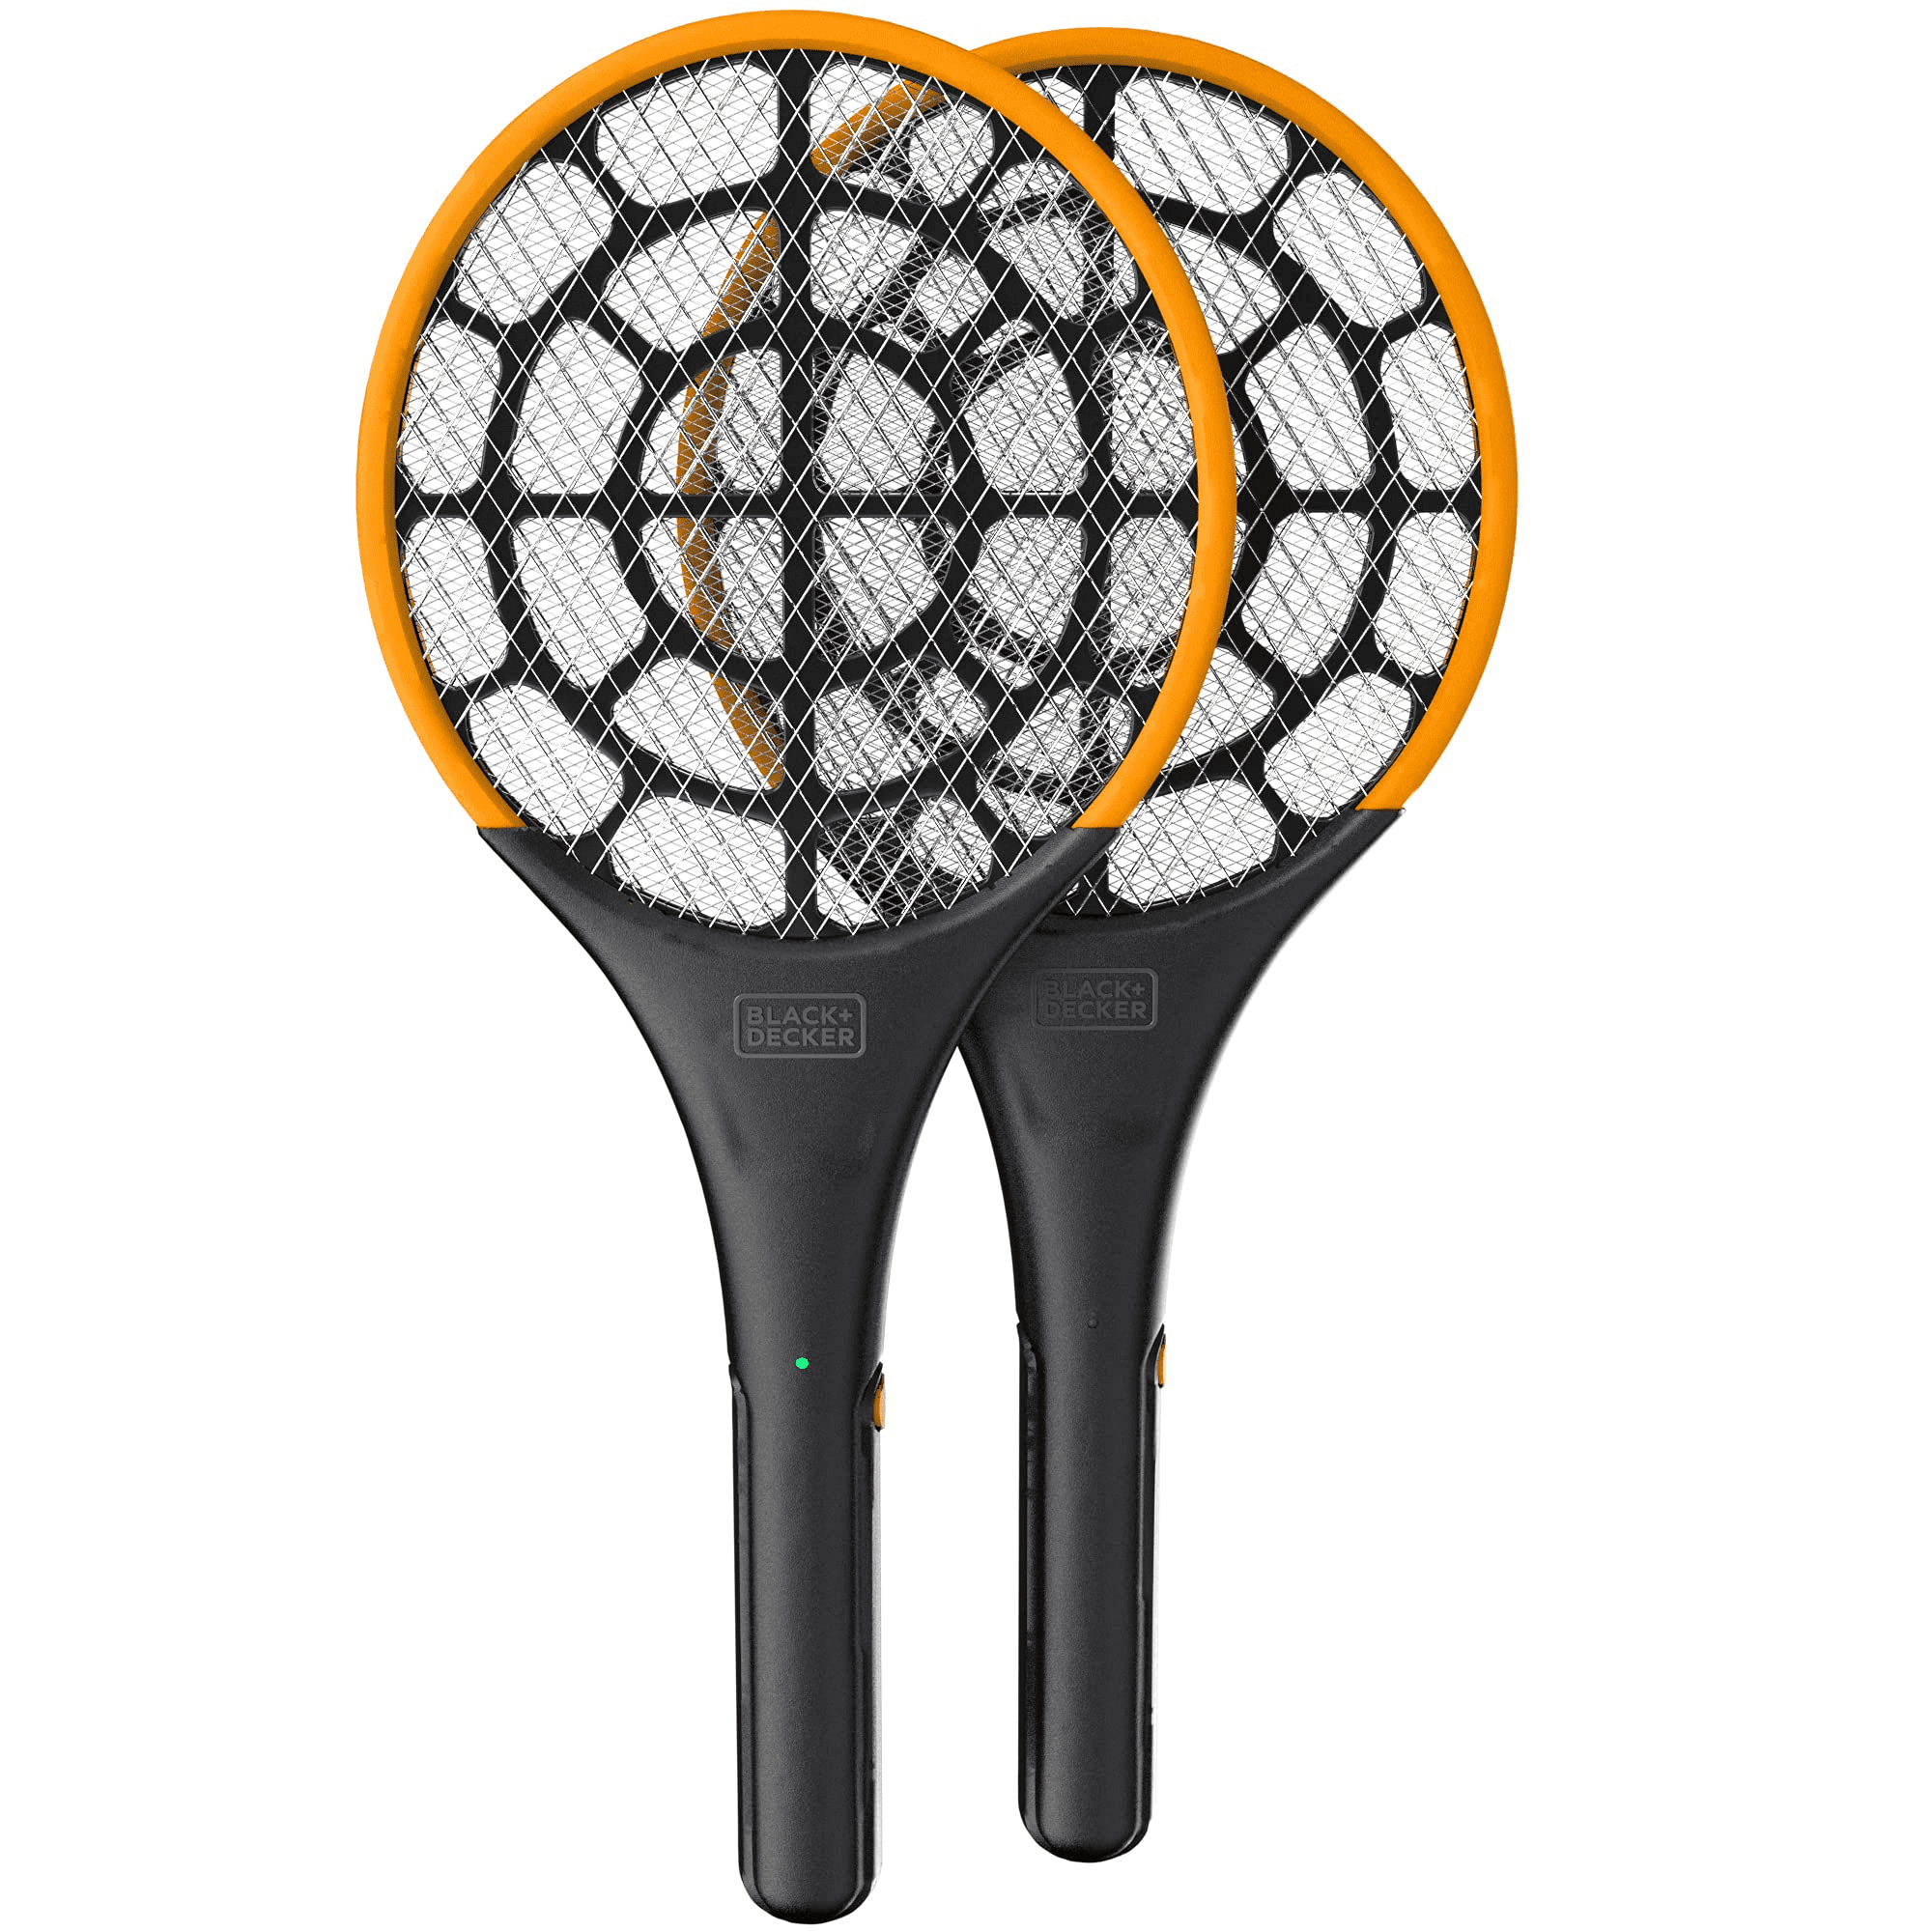 Battery Fly Swatter Mosquito Racket Swatter Electric Pest Control Handheld 